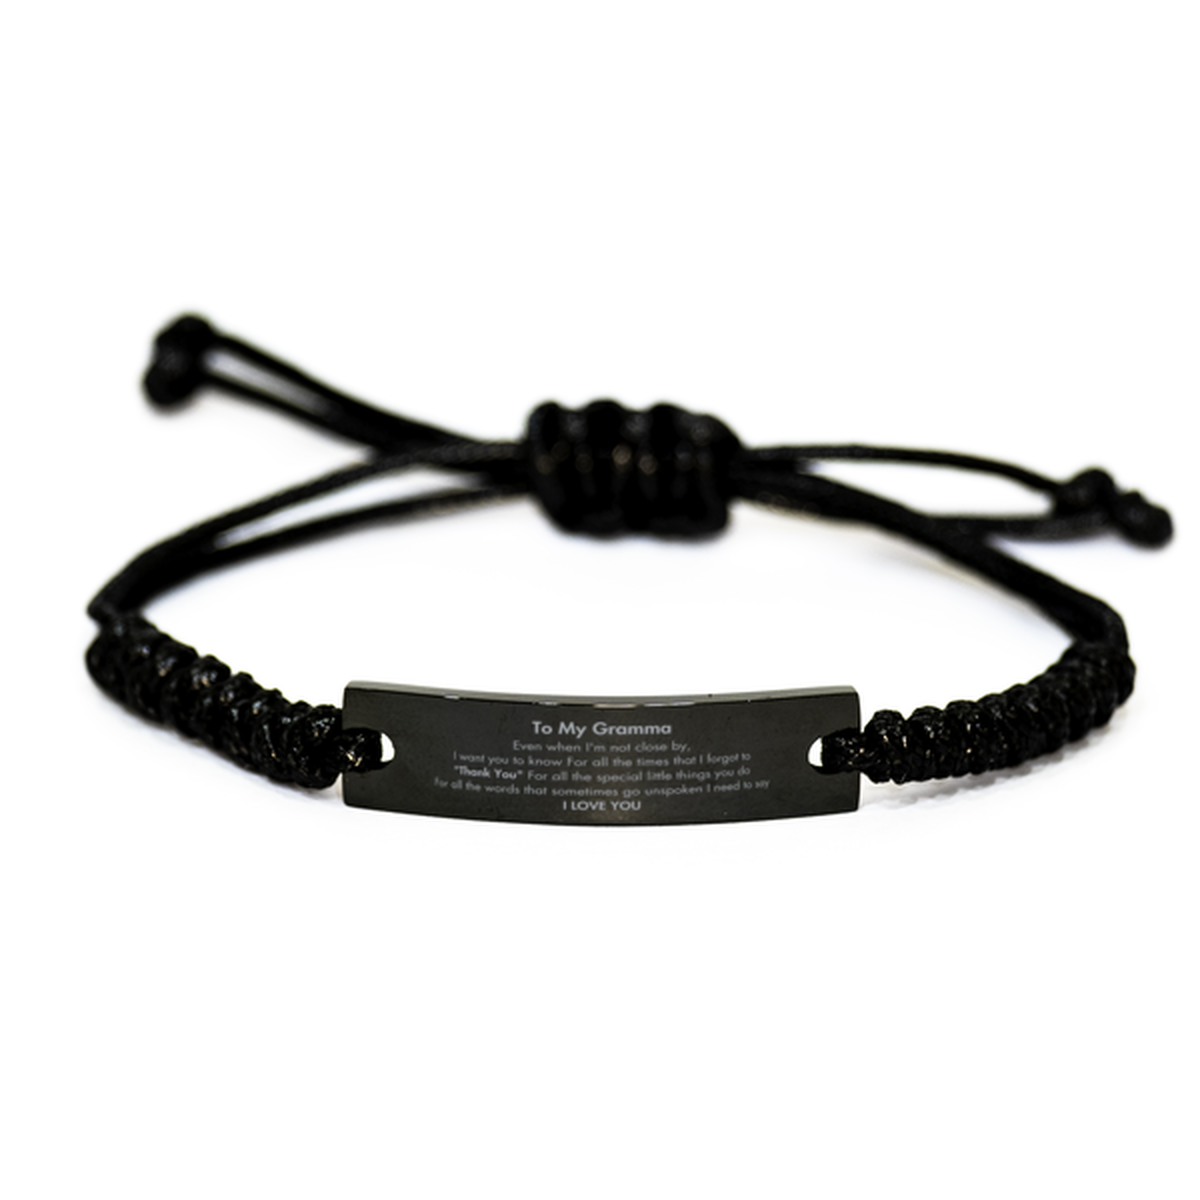 Thank You Gifts for Gramma, Keepsake Black Rope Bracelet Gifts for Gramma Birthday Mother's day Father's Day Gramma For all the words That sometimes go unspoken I need to say I LOVE YOU